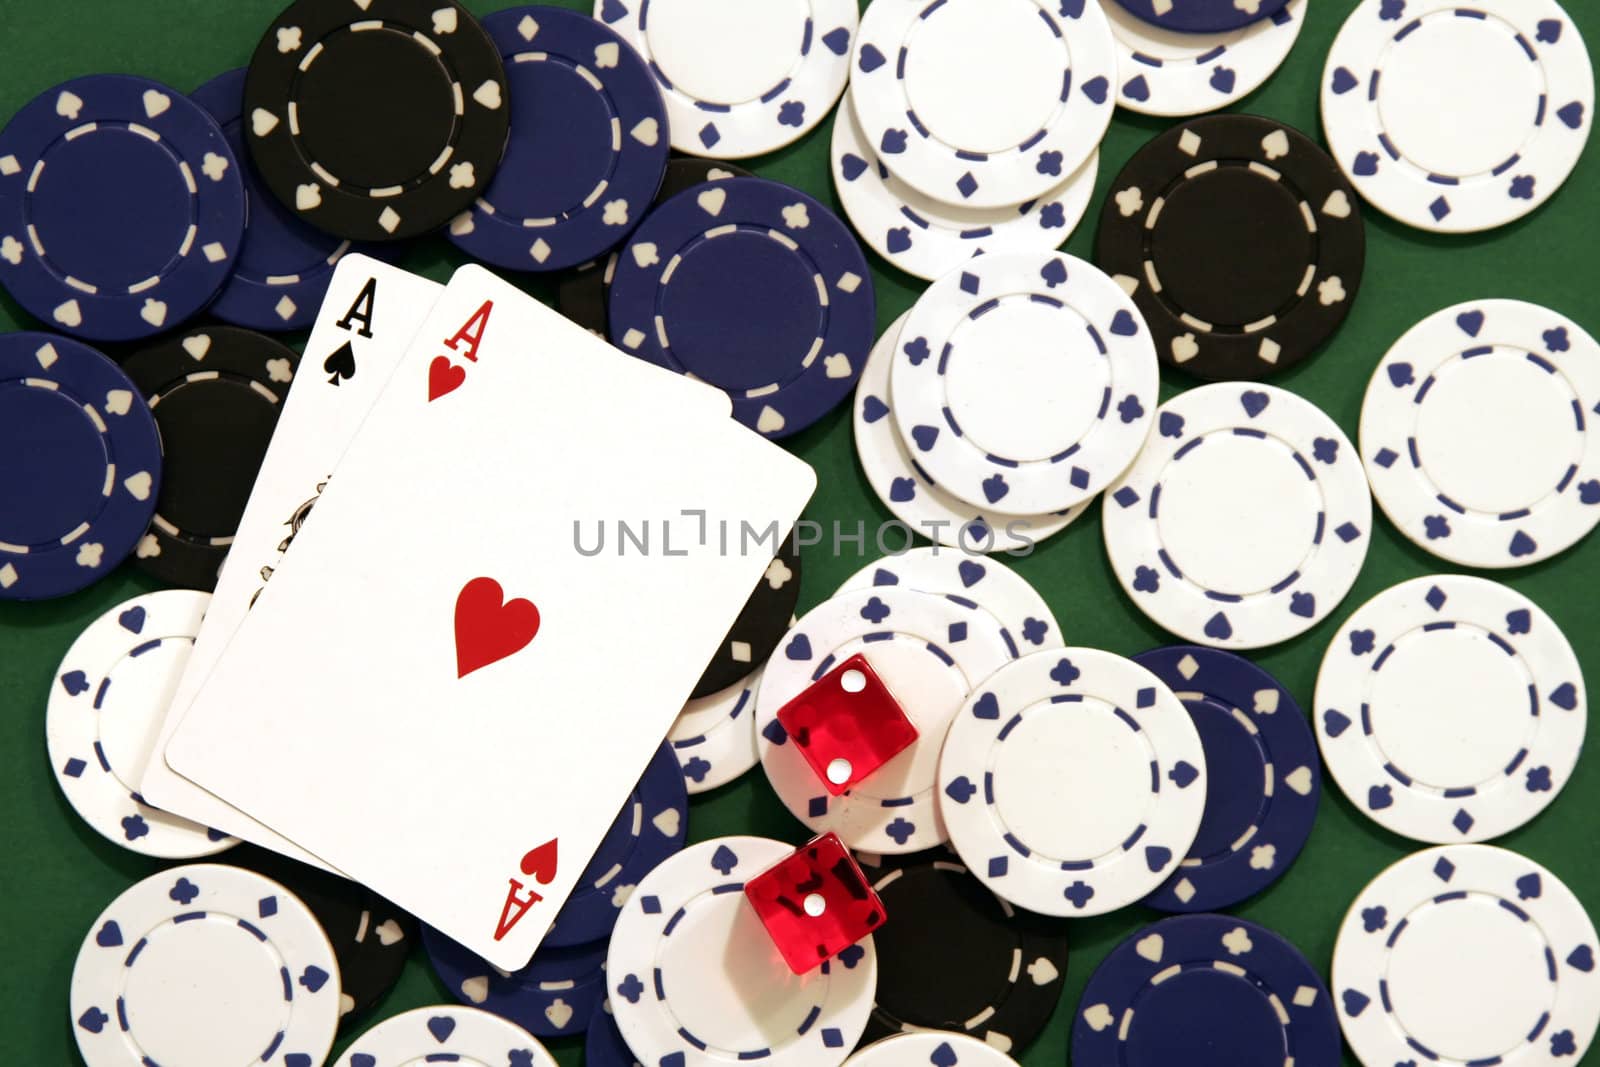 Casino Chips, Dice and Cards on Green Background